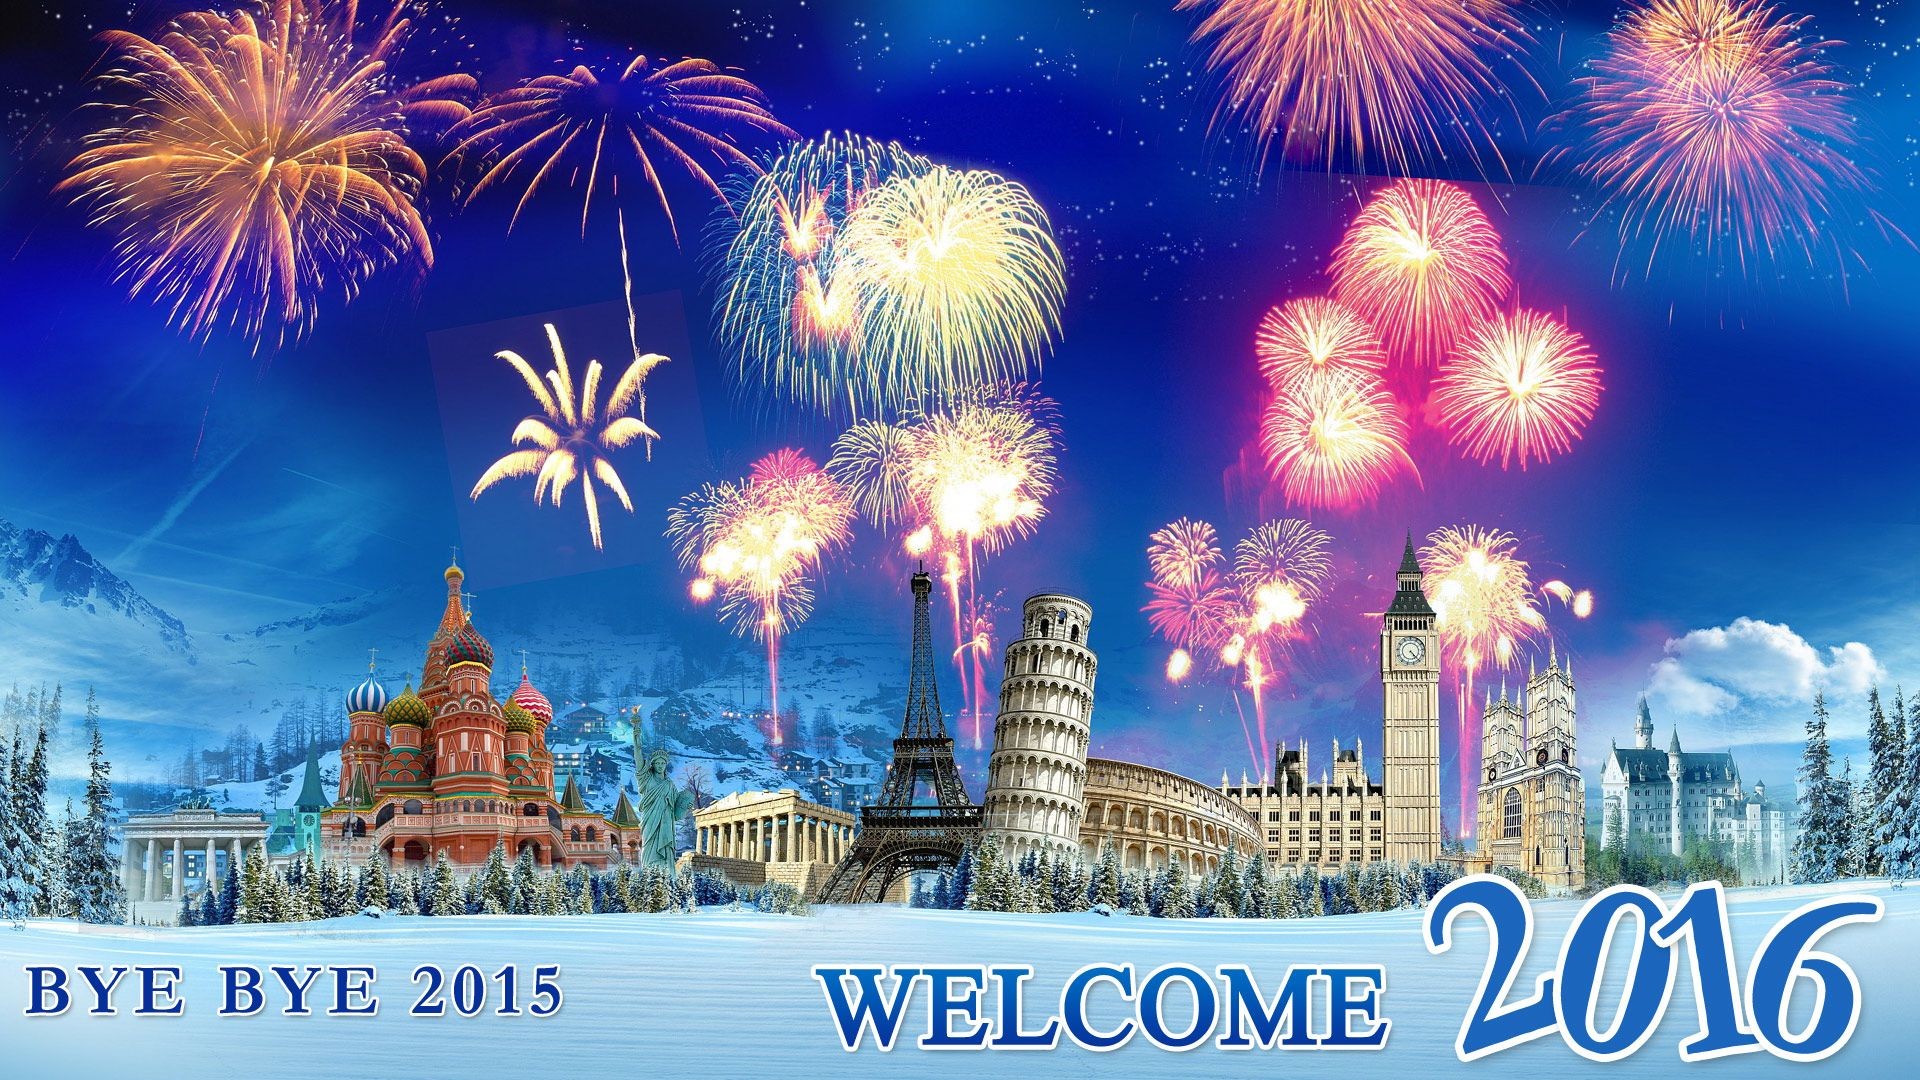 1920x1080 Bye bye 2015 welcome 2016 wallpaper – Free full hd wallpapers for .